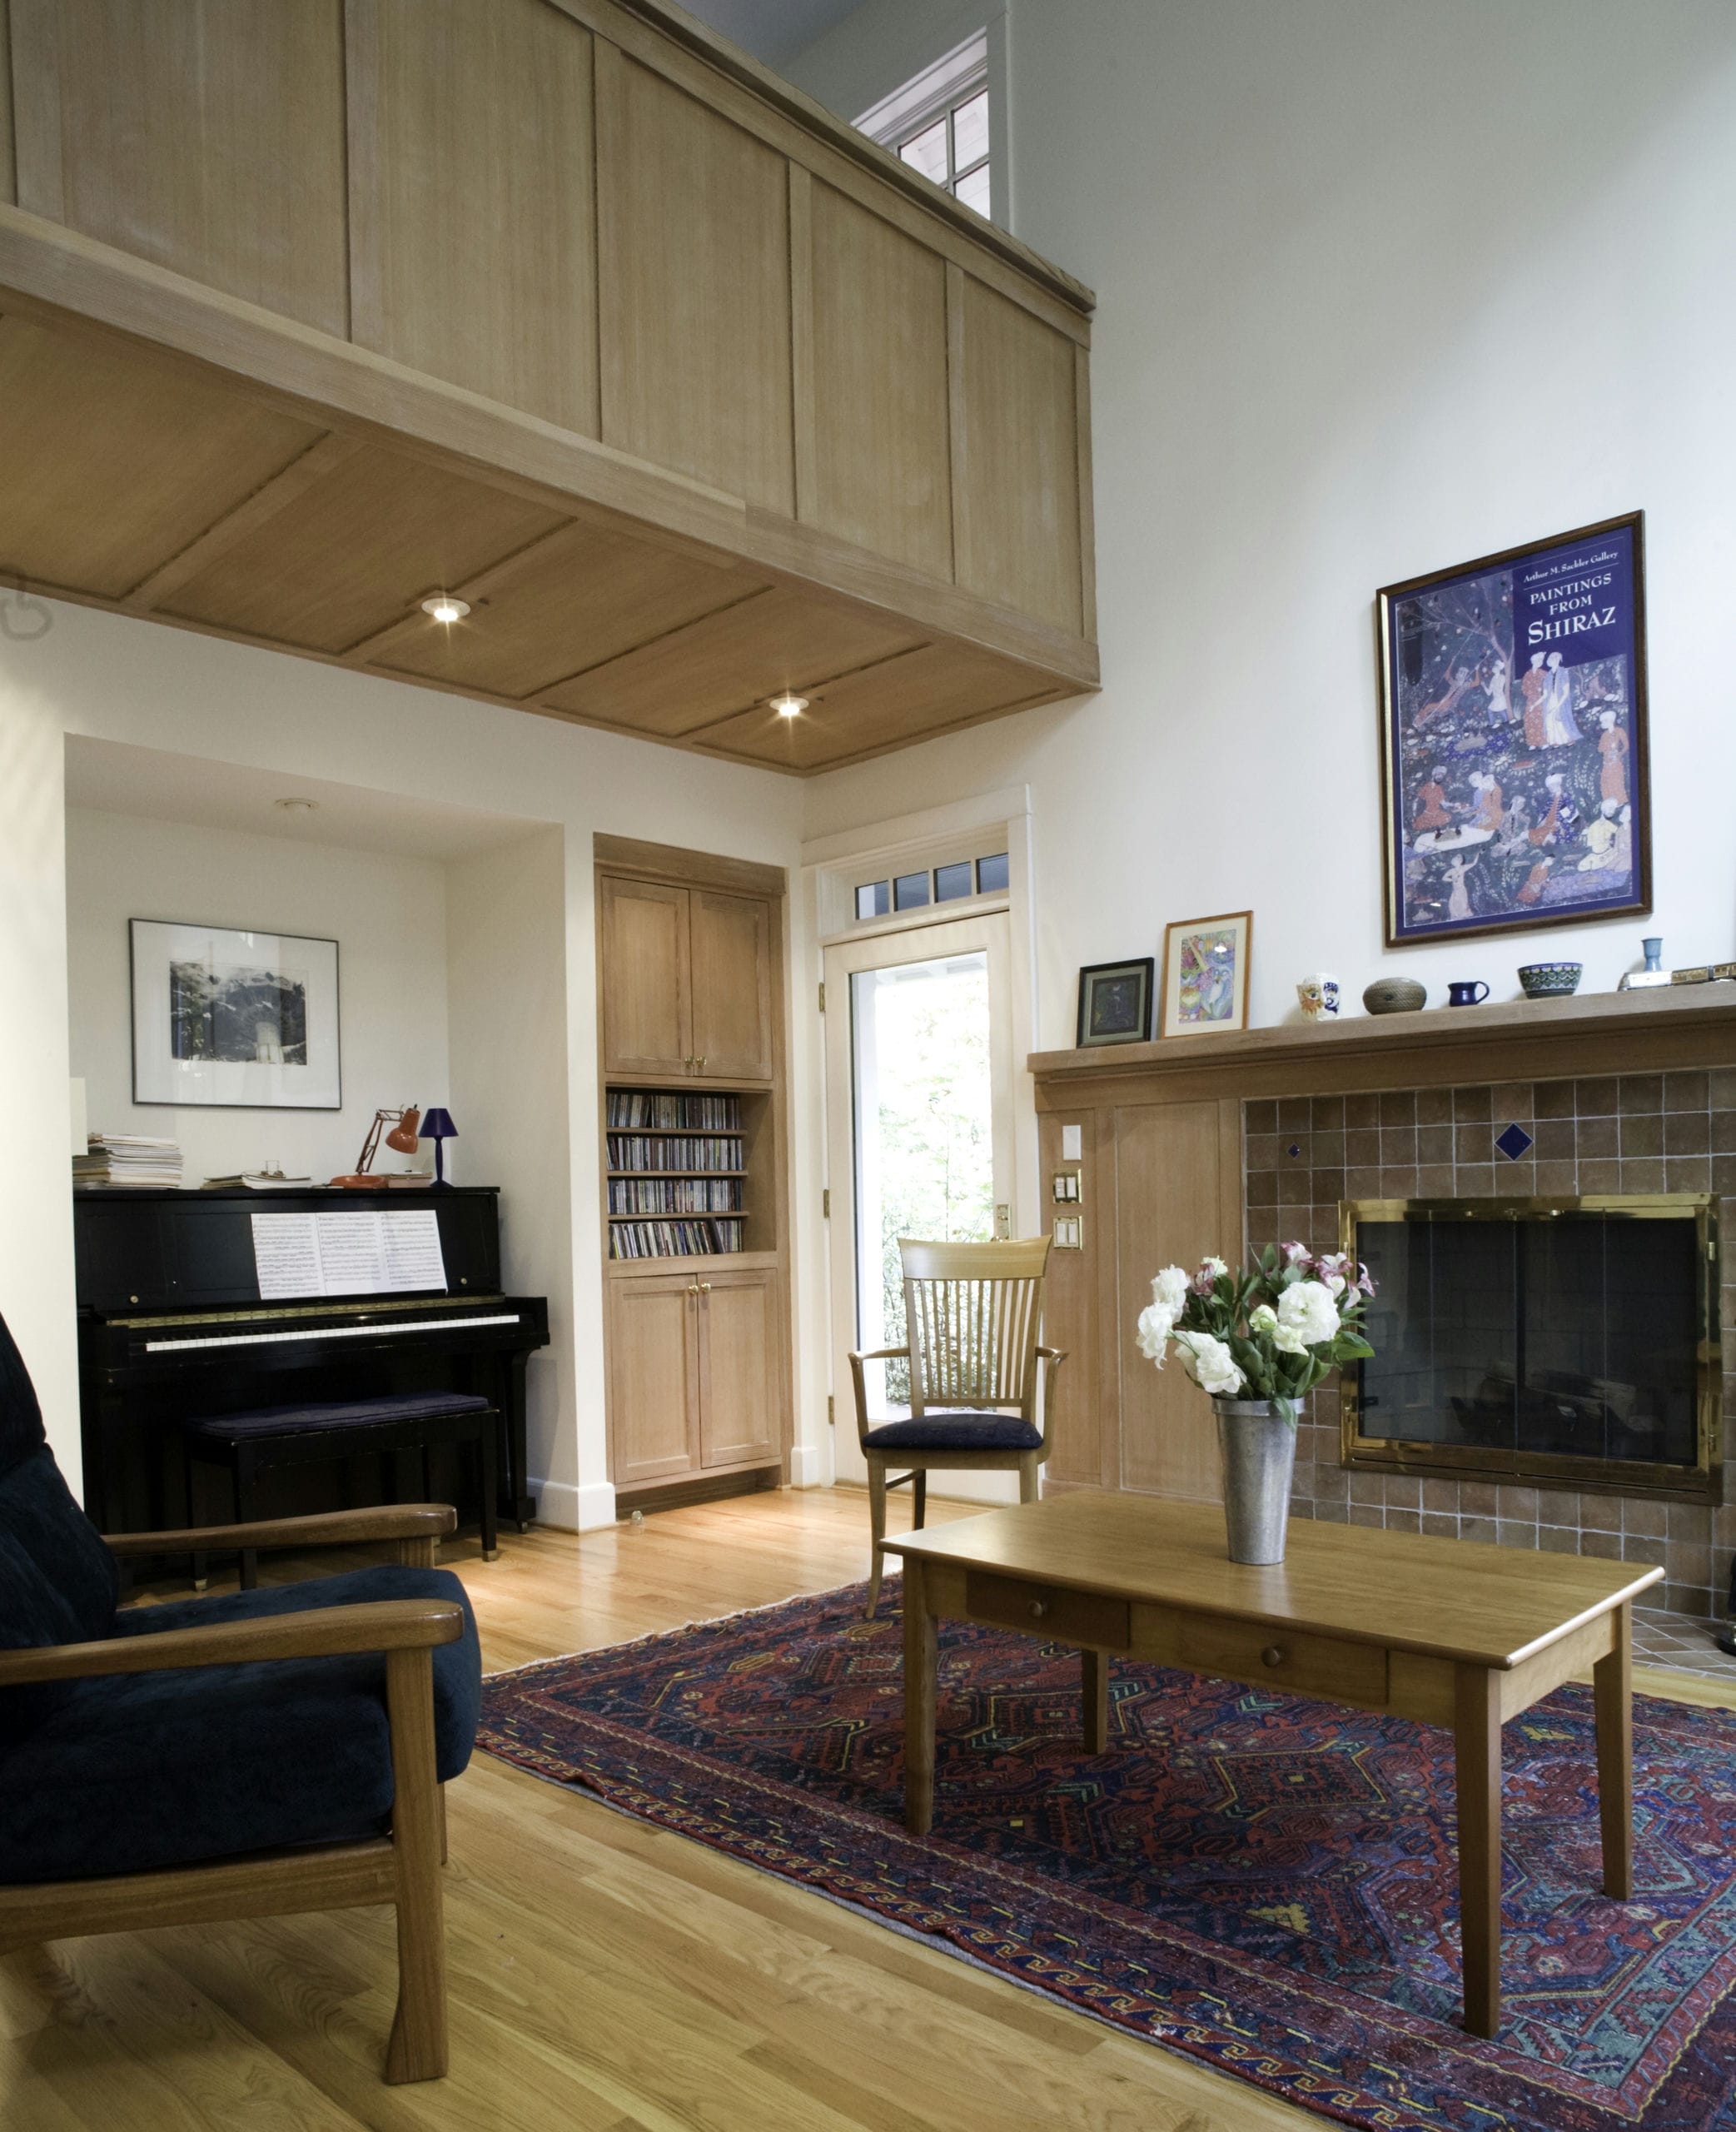 Double height living space with upstairs mezzanine, built-in coves for a piano and bookshelves, and a central fireplace.